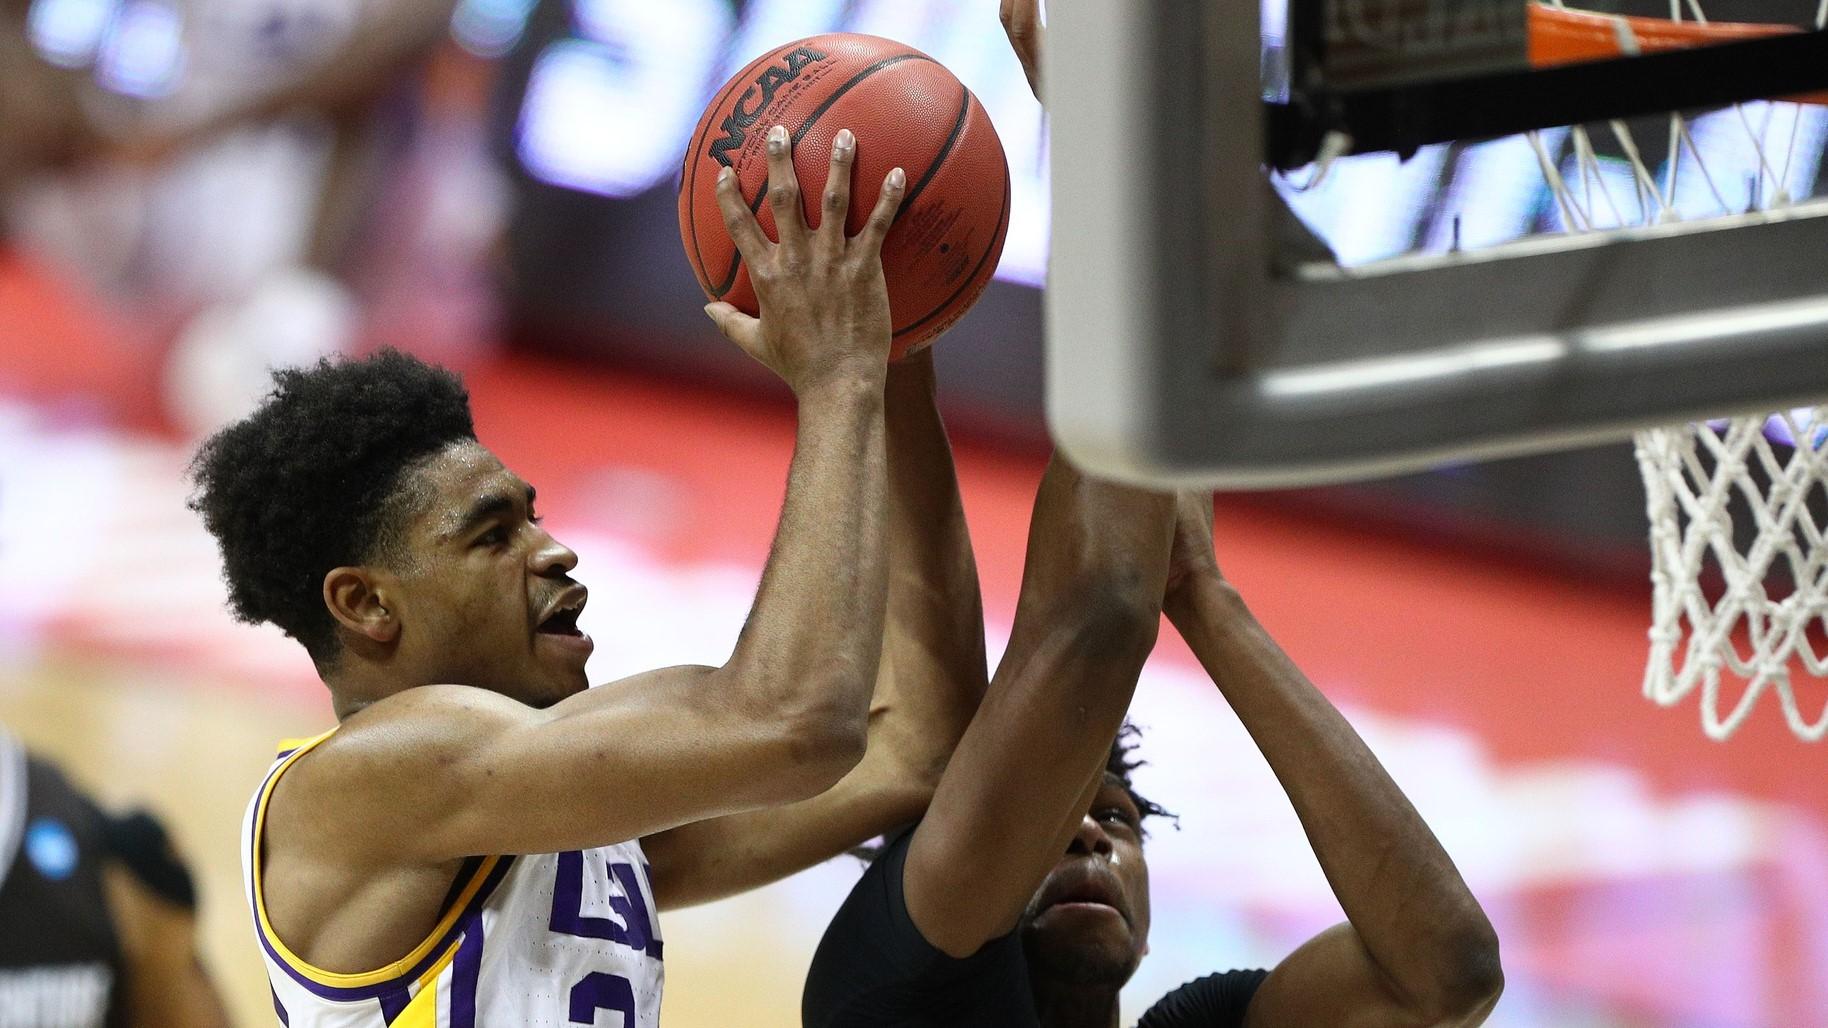 Louisiana State Tigers guard Cameron Thomas (24) moves to the basket against St. Bonaventure Bonnies forward Osun Osunniyi (21) during the first half in the first round of the 2021 NCAA Tournament at Simon Skjodt Assembly Hall. / Jordan Prather-USA TODAY Sports